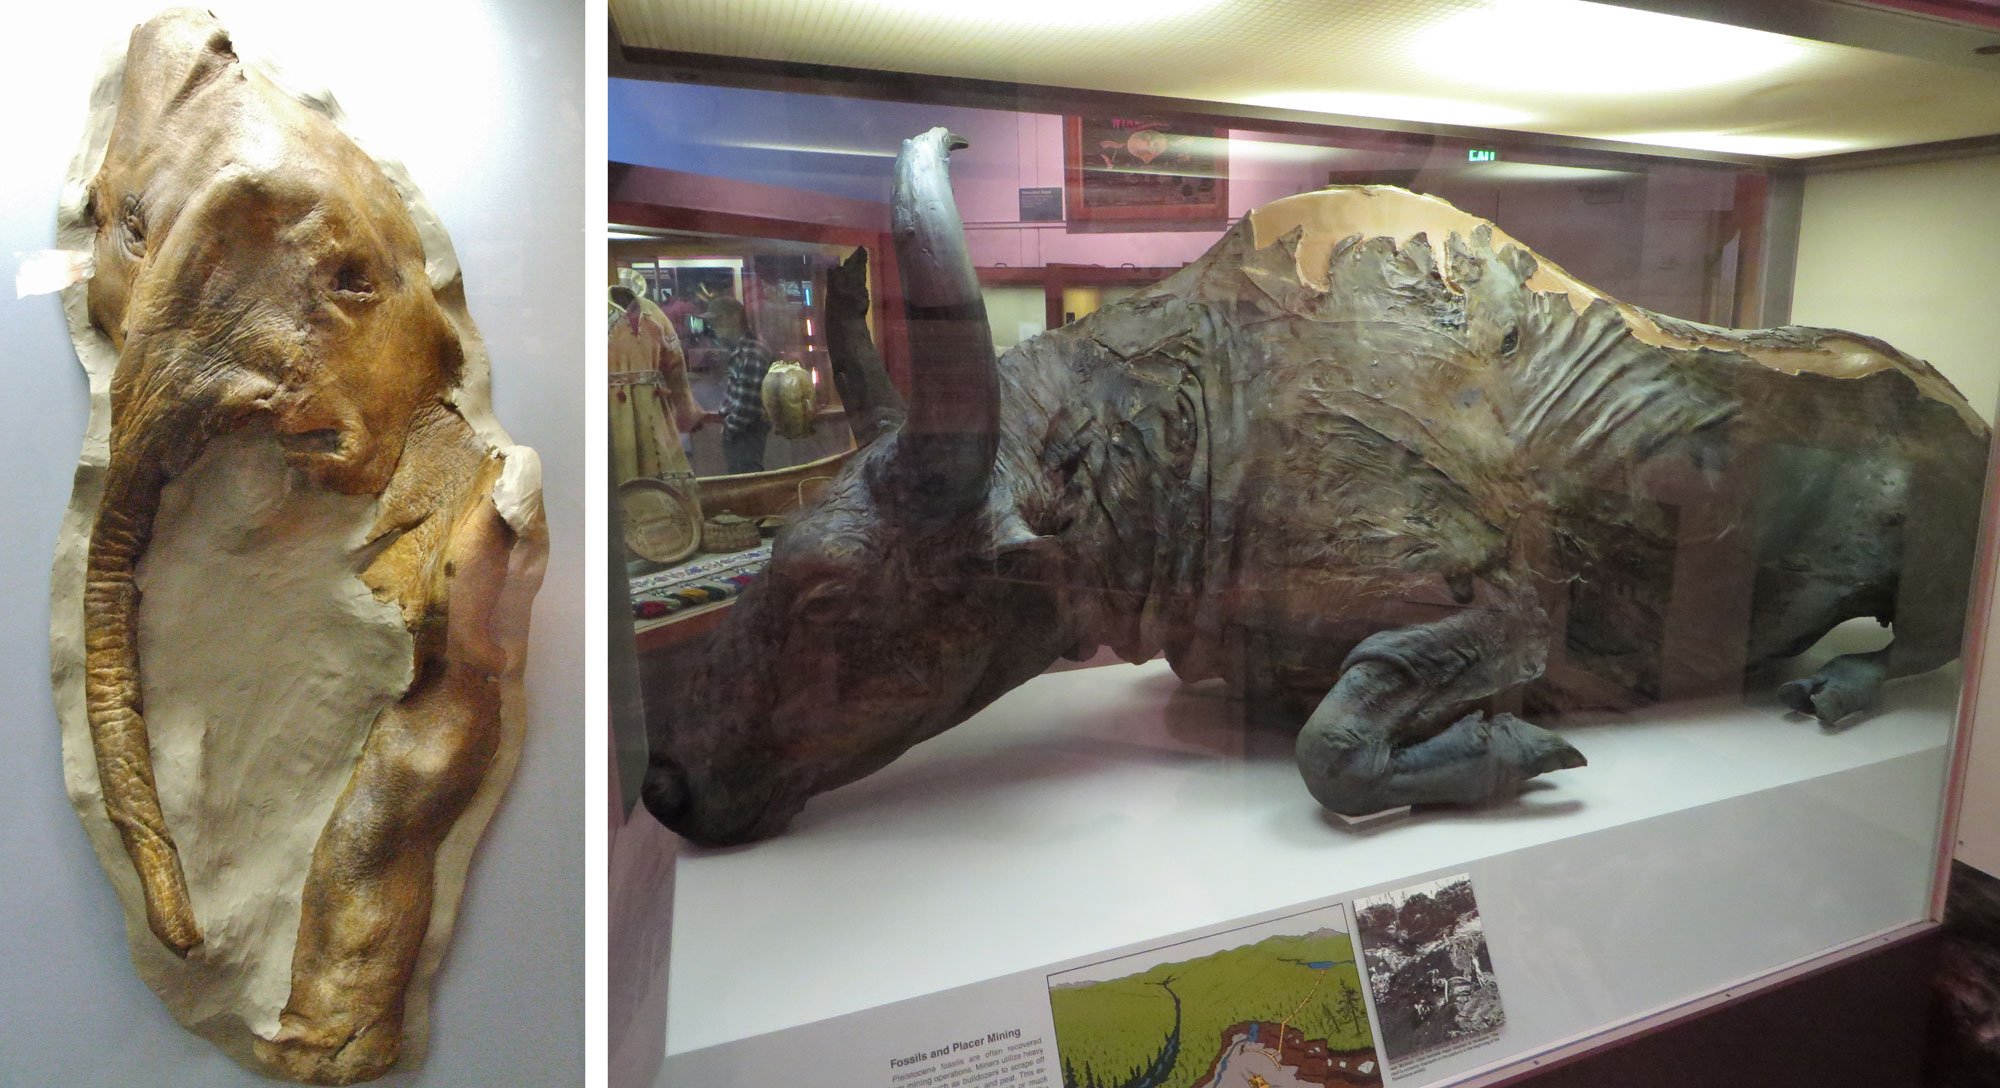 Mummies of Pleistocene mammals from Alaska, 2-panel image. Panel 1: Effie the baby mammoth on display in a museum. Effie's skin is preserved. Only the front of the face, the trunk, and a foreleg is preserved. Panel 2: Blue Babe, a steppe bison, on display in a glass case. Blue Babe is shown from the side and appears to be complete. The specimen is a bison with long horns that curve outward then upward. The skin is preserved and looks leather-like.